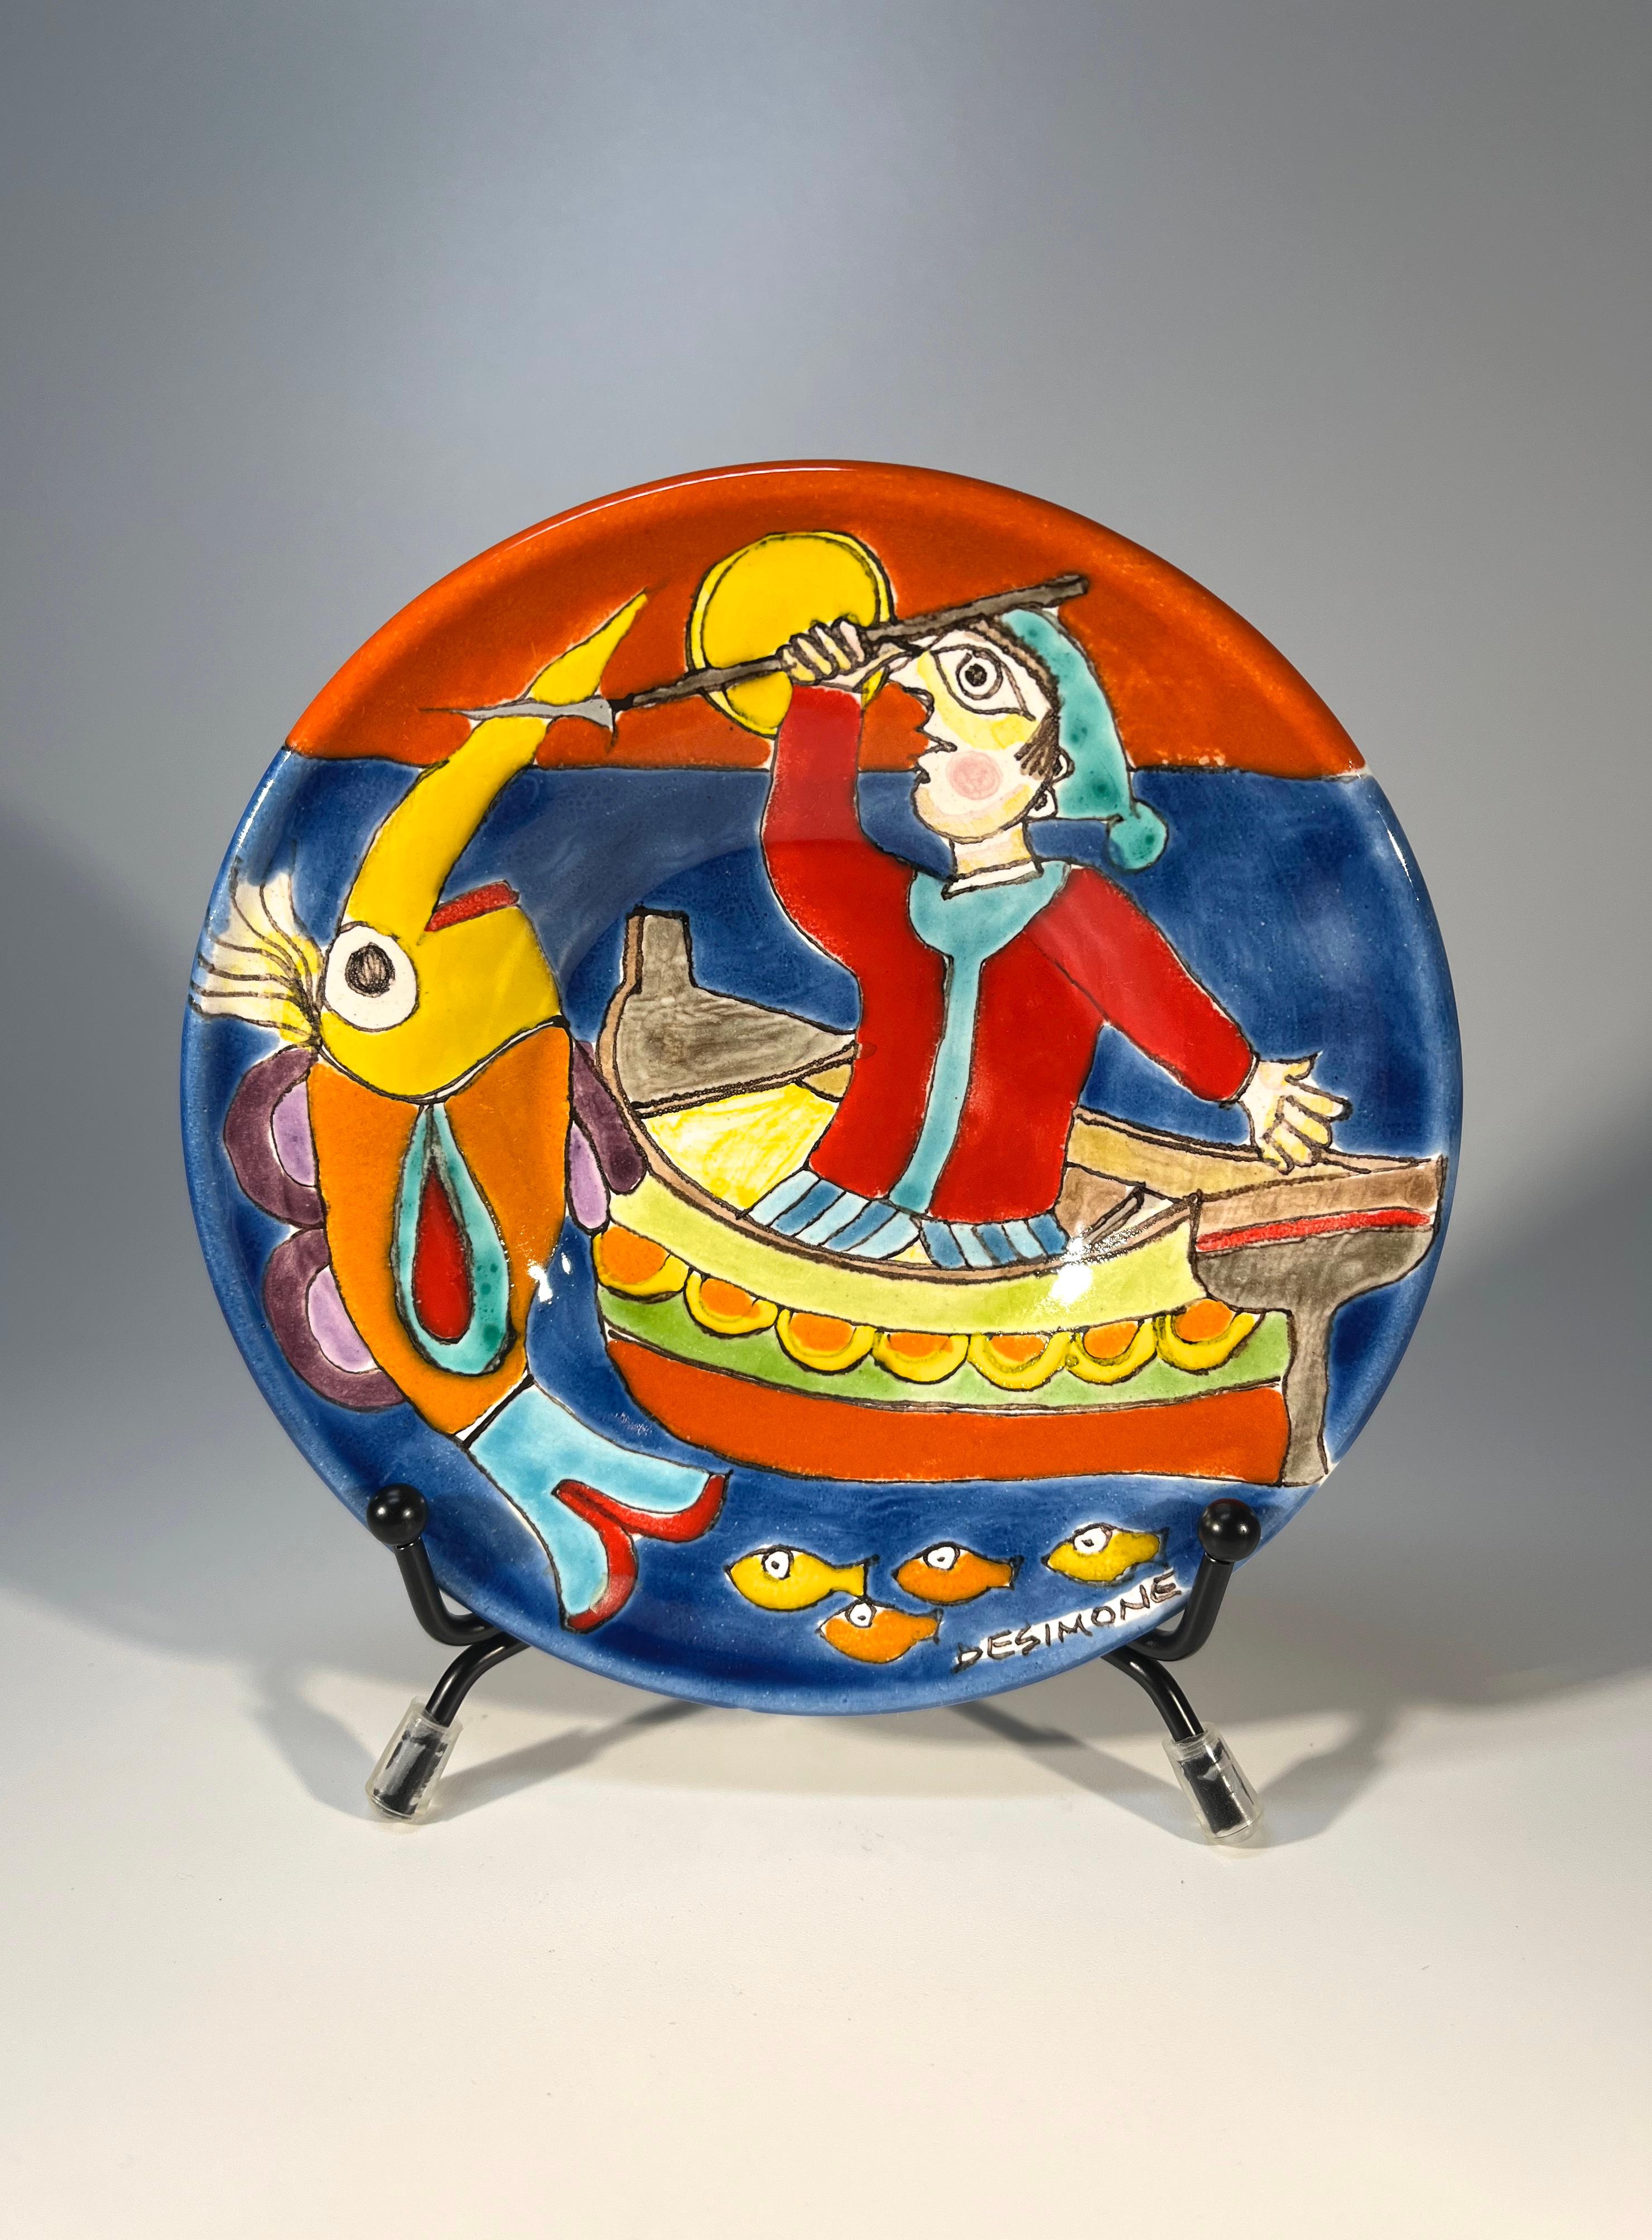 Original and signed by Giovanni DeSimone, this hand-painted little plate is full of colour and life depicting a busy Sicilian fisherman
Small in size, huge on personality - Giovanni at his best
The condition of this piece is exceptional 
Signed to